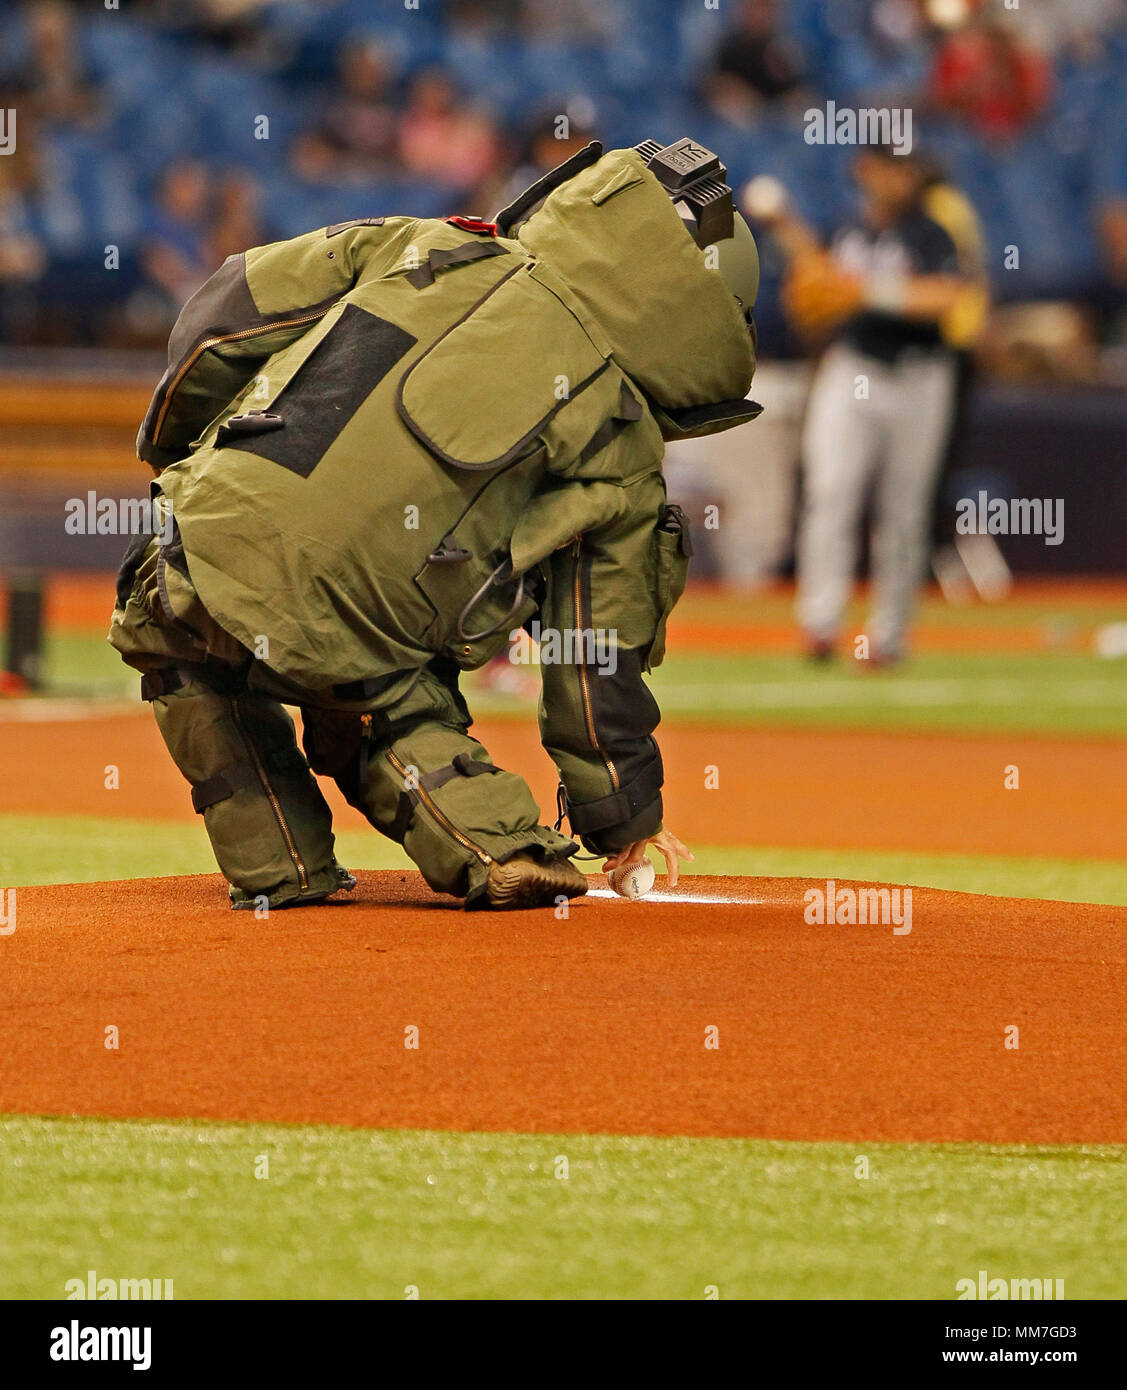 St. Petersburg, Florida, USA. 9th May, 2018. JIM DAMASKE | Times.A Navy EOD technician brings the ball out to the mound for the start of the Tampa Bay Rays home game against the Atlanta Braves at Tropicana Field in St. Petersburg, FL 5/9/2018. Credit: Jim Damaske/Tampa Bay Times/ZUMA Wire/Alamy Live News Stock Photo